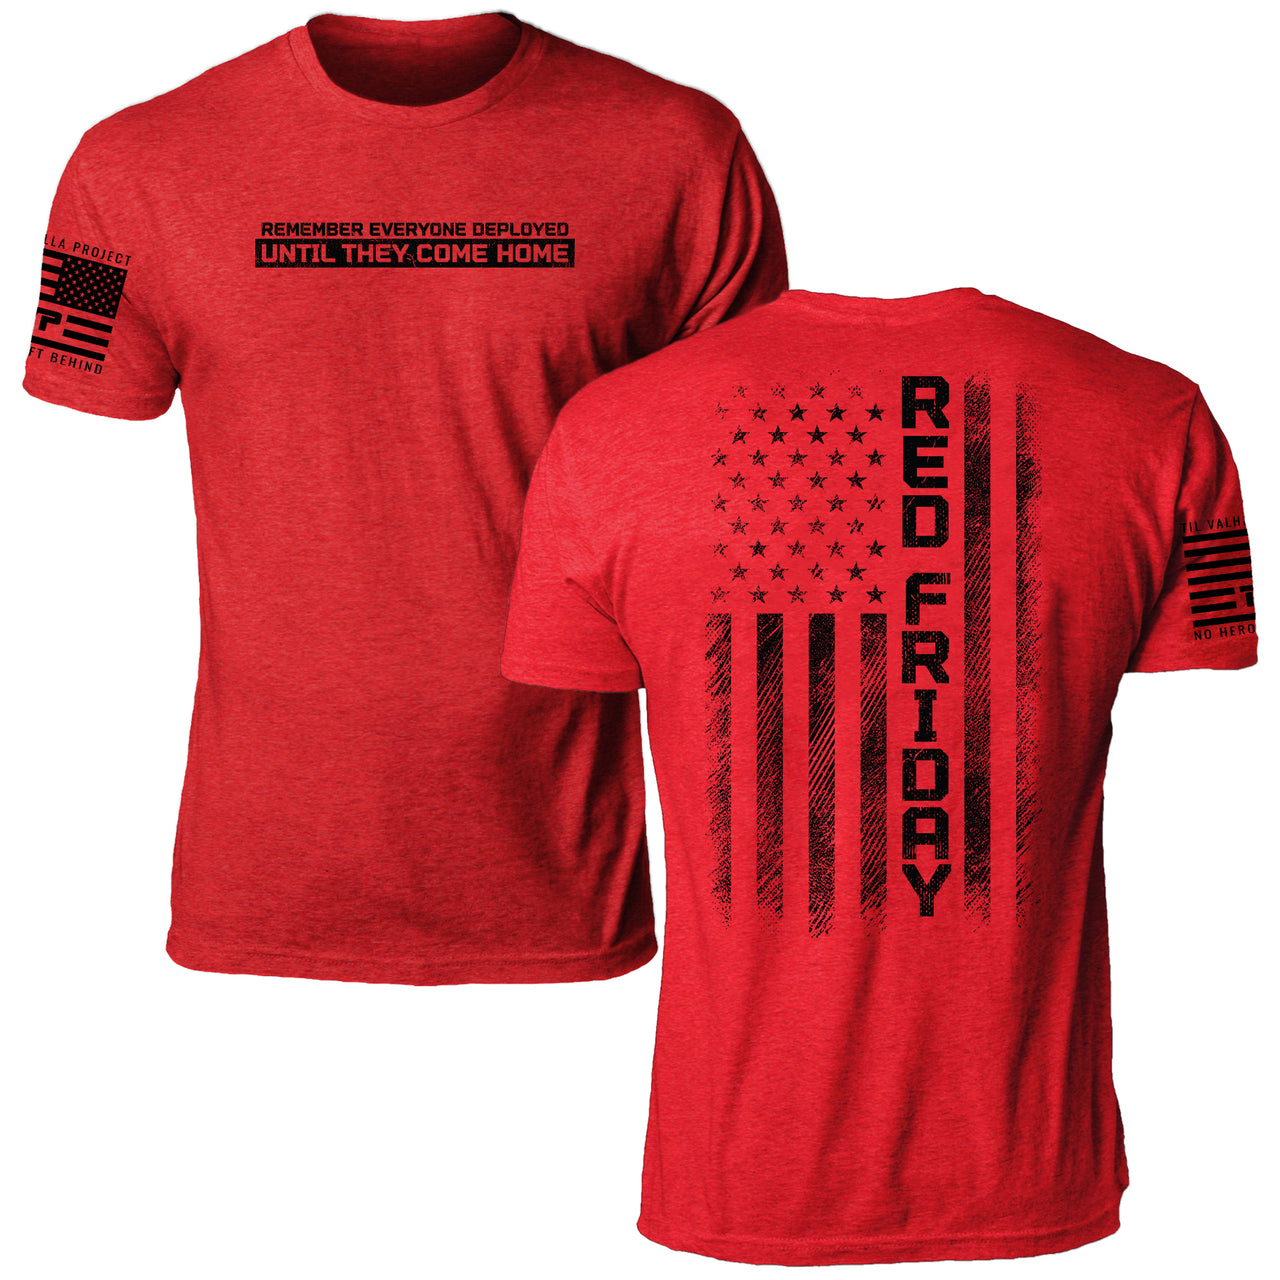 Deployed Remembrance Tee